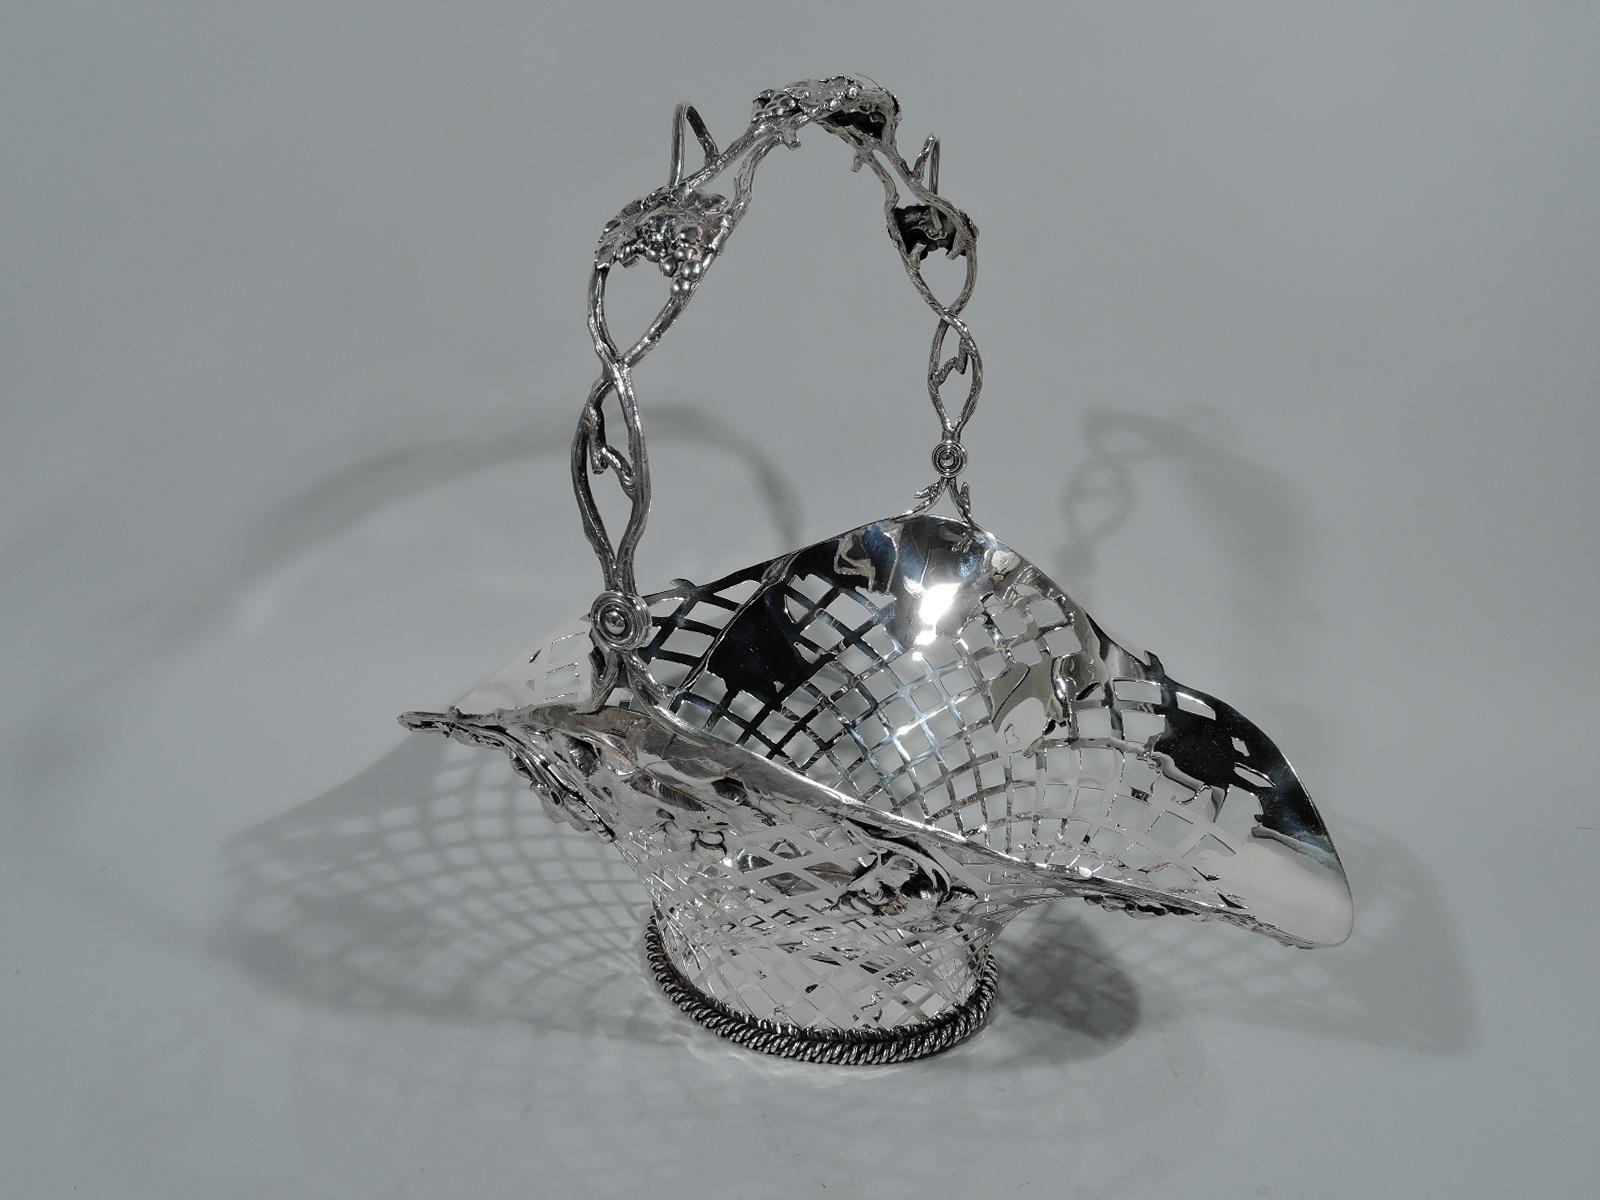 Large and bountiful Art Nouveau sterling silver basket. Made by Mauser in New York. Oval with flared ovoid mouth and c-scroll open swing handle. Open weave sides with vine-form rim fruiting grape bunches applied to sides. Handle same. Hallmarked.